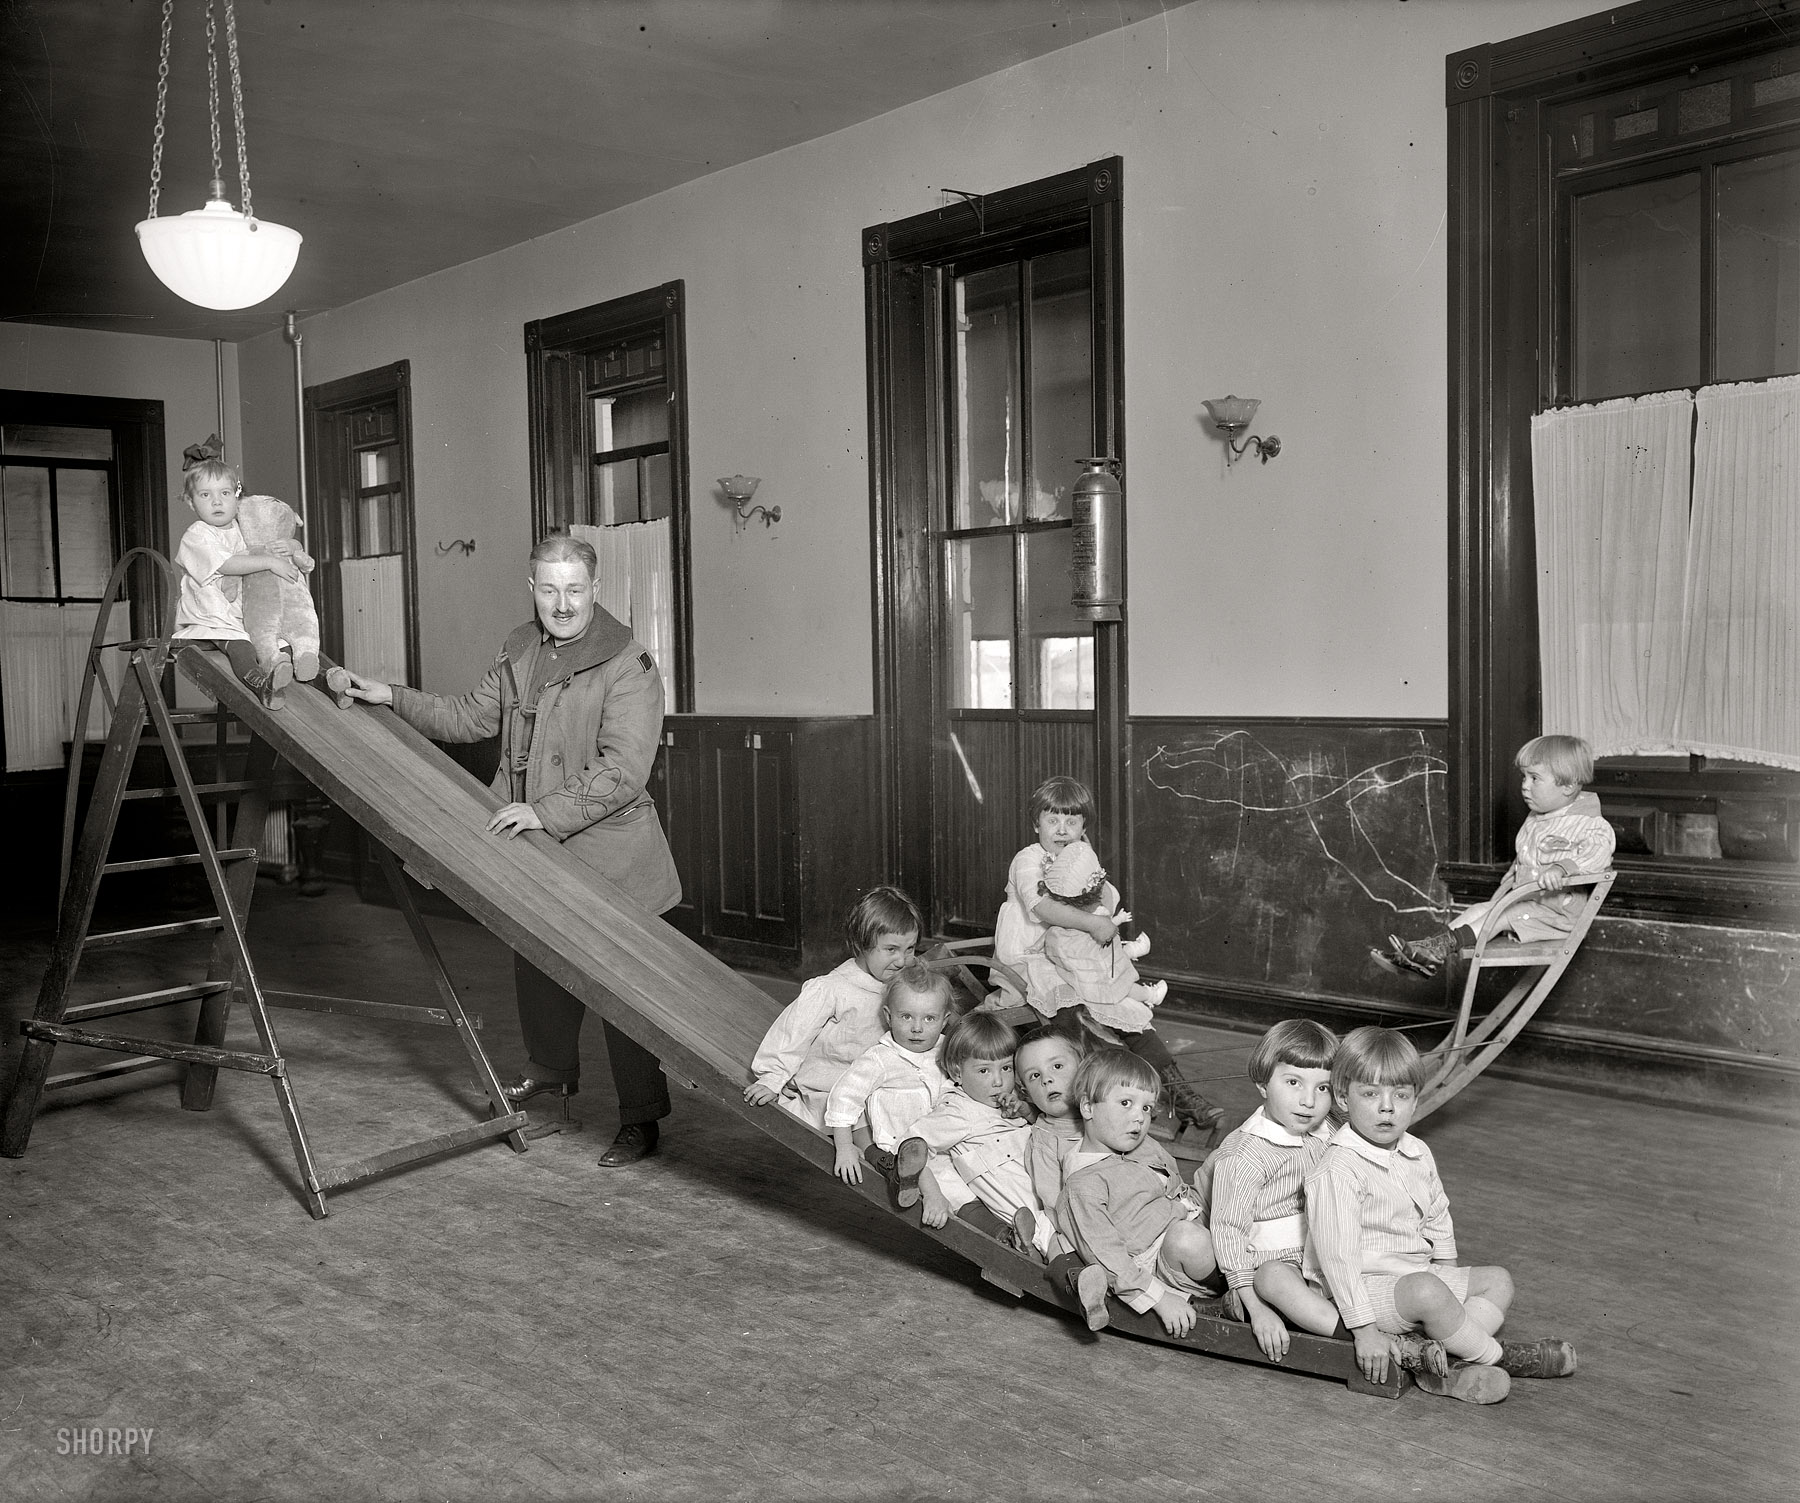 Washington, D.C., circa 1921. "Foundling Hospital, playroom." Tots at the Washington Asylum for Foundlings, 1715 15th Street N.W., with their benefactor Lt. George Pickett 3rd. Harris & Ewing Collection glass negative. View full size.